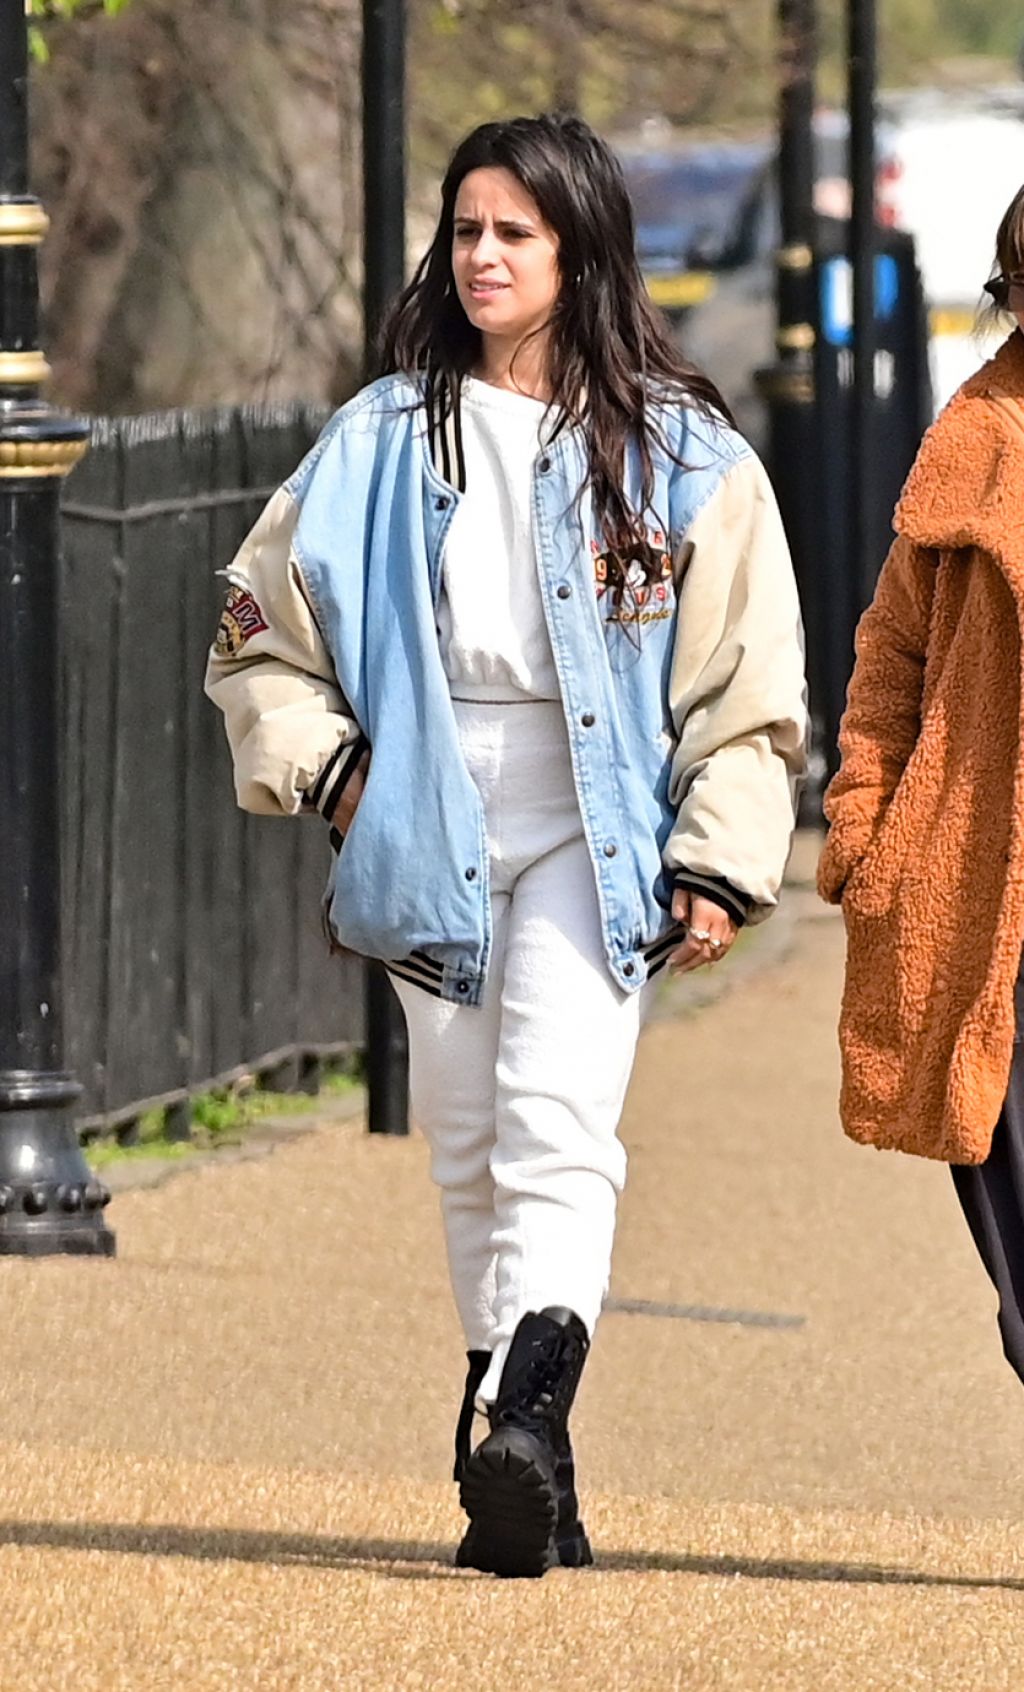 Camila Cabello – Seen in a London park with her